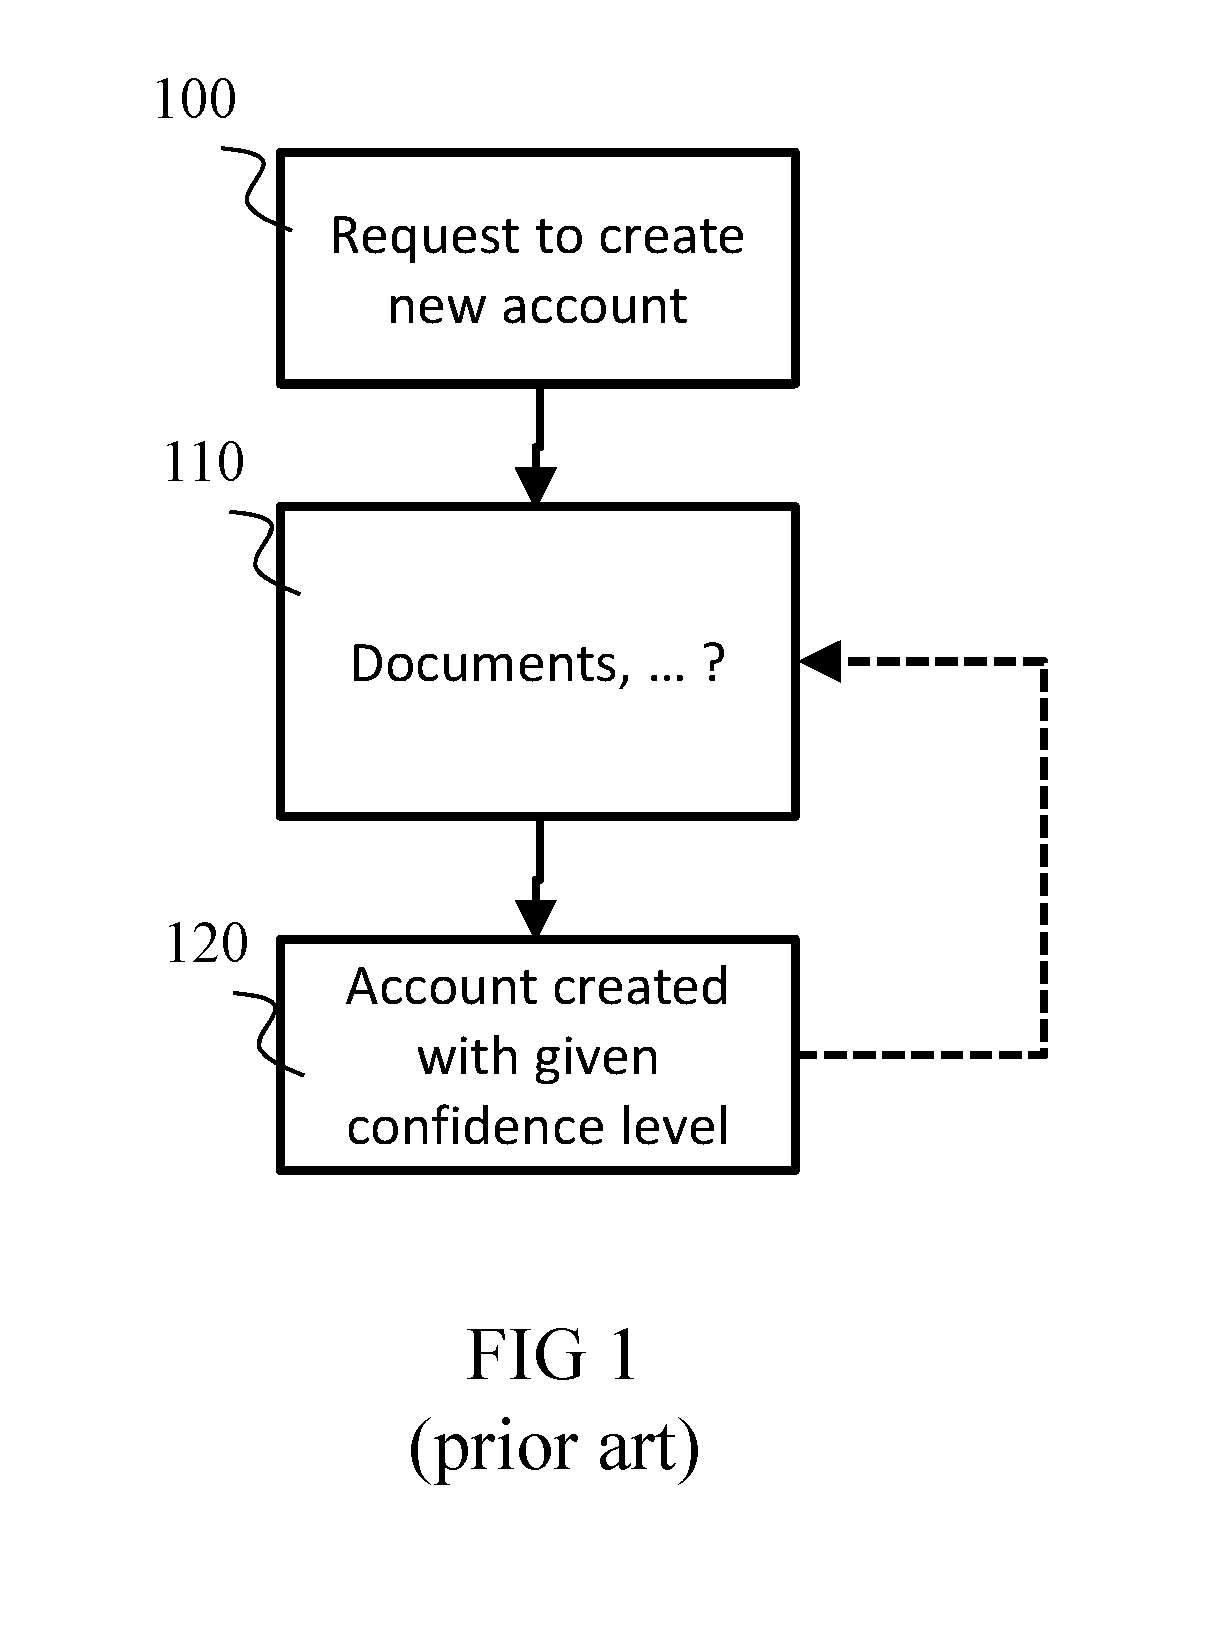 Method for checking a parameter indicating a confidence level associated with a user account of an online service